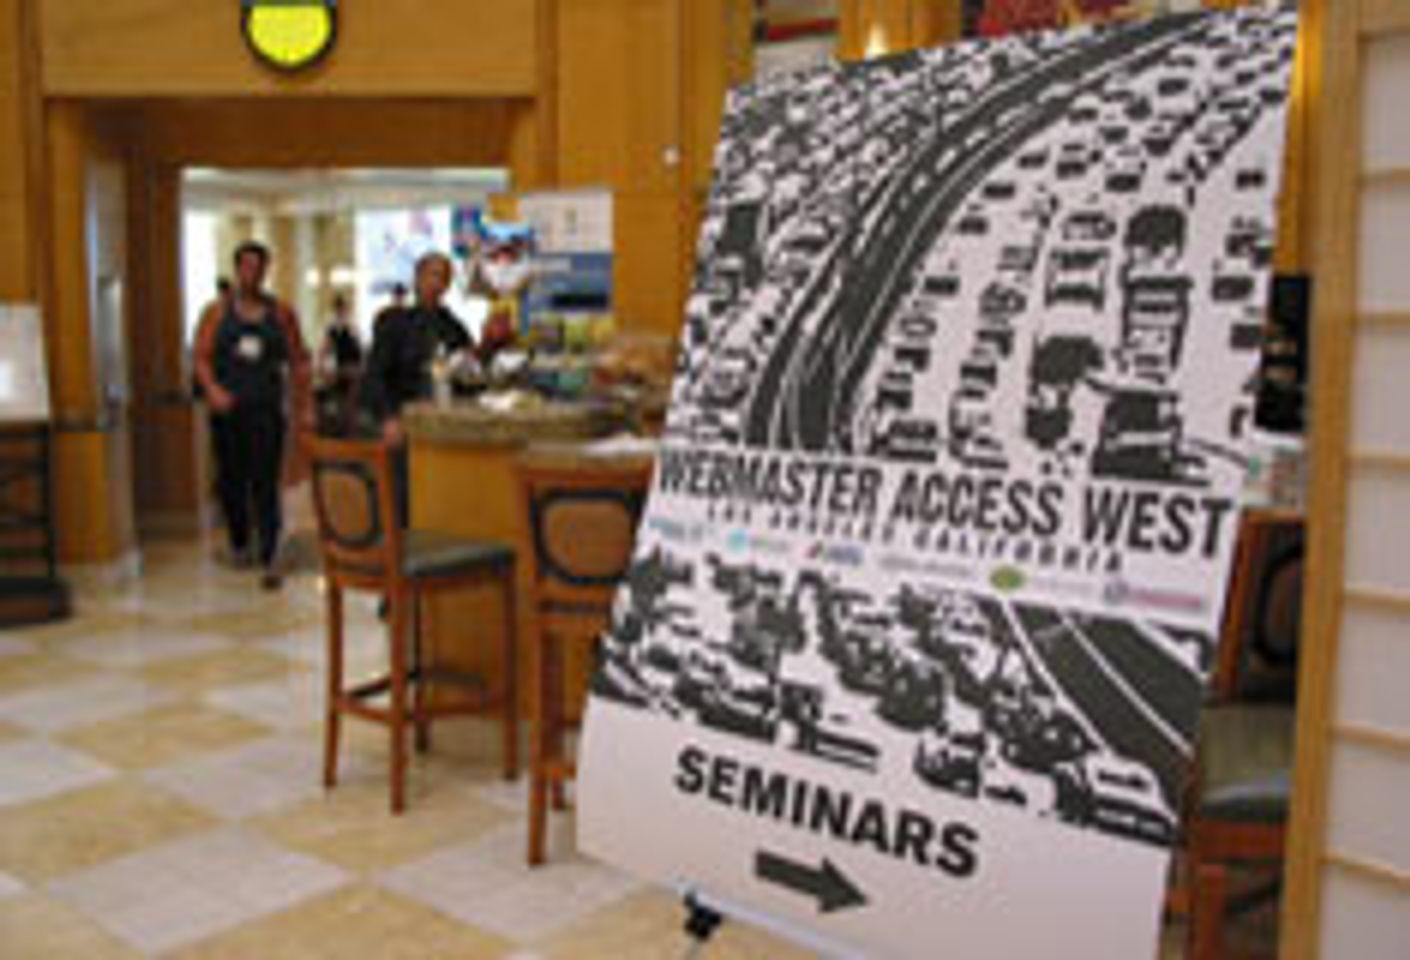 Webmaster Access West Targets The State Of The Industry